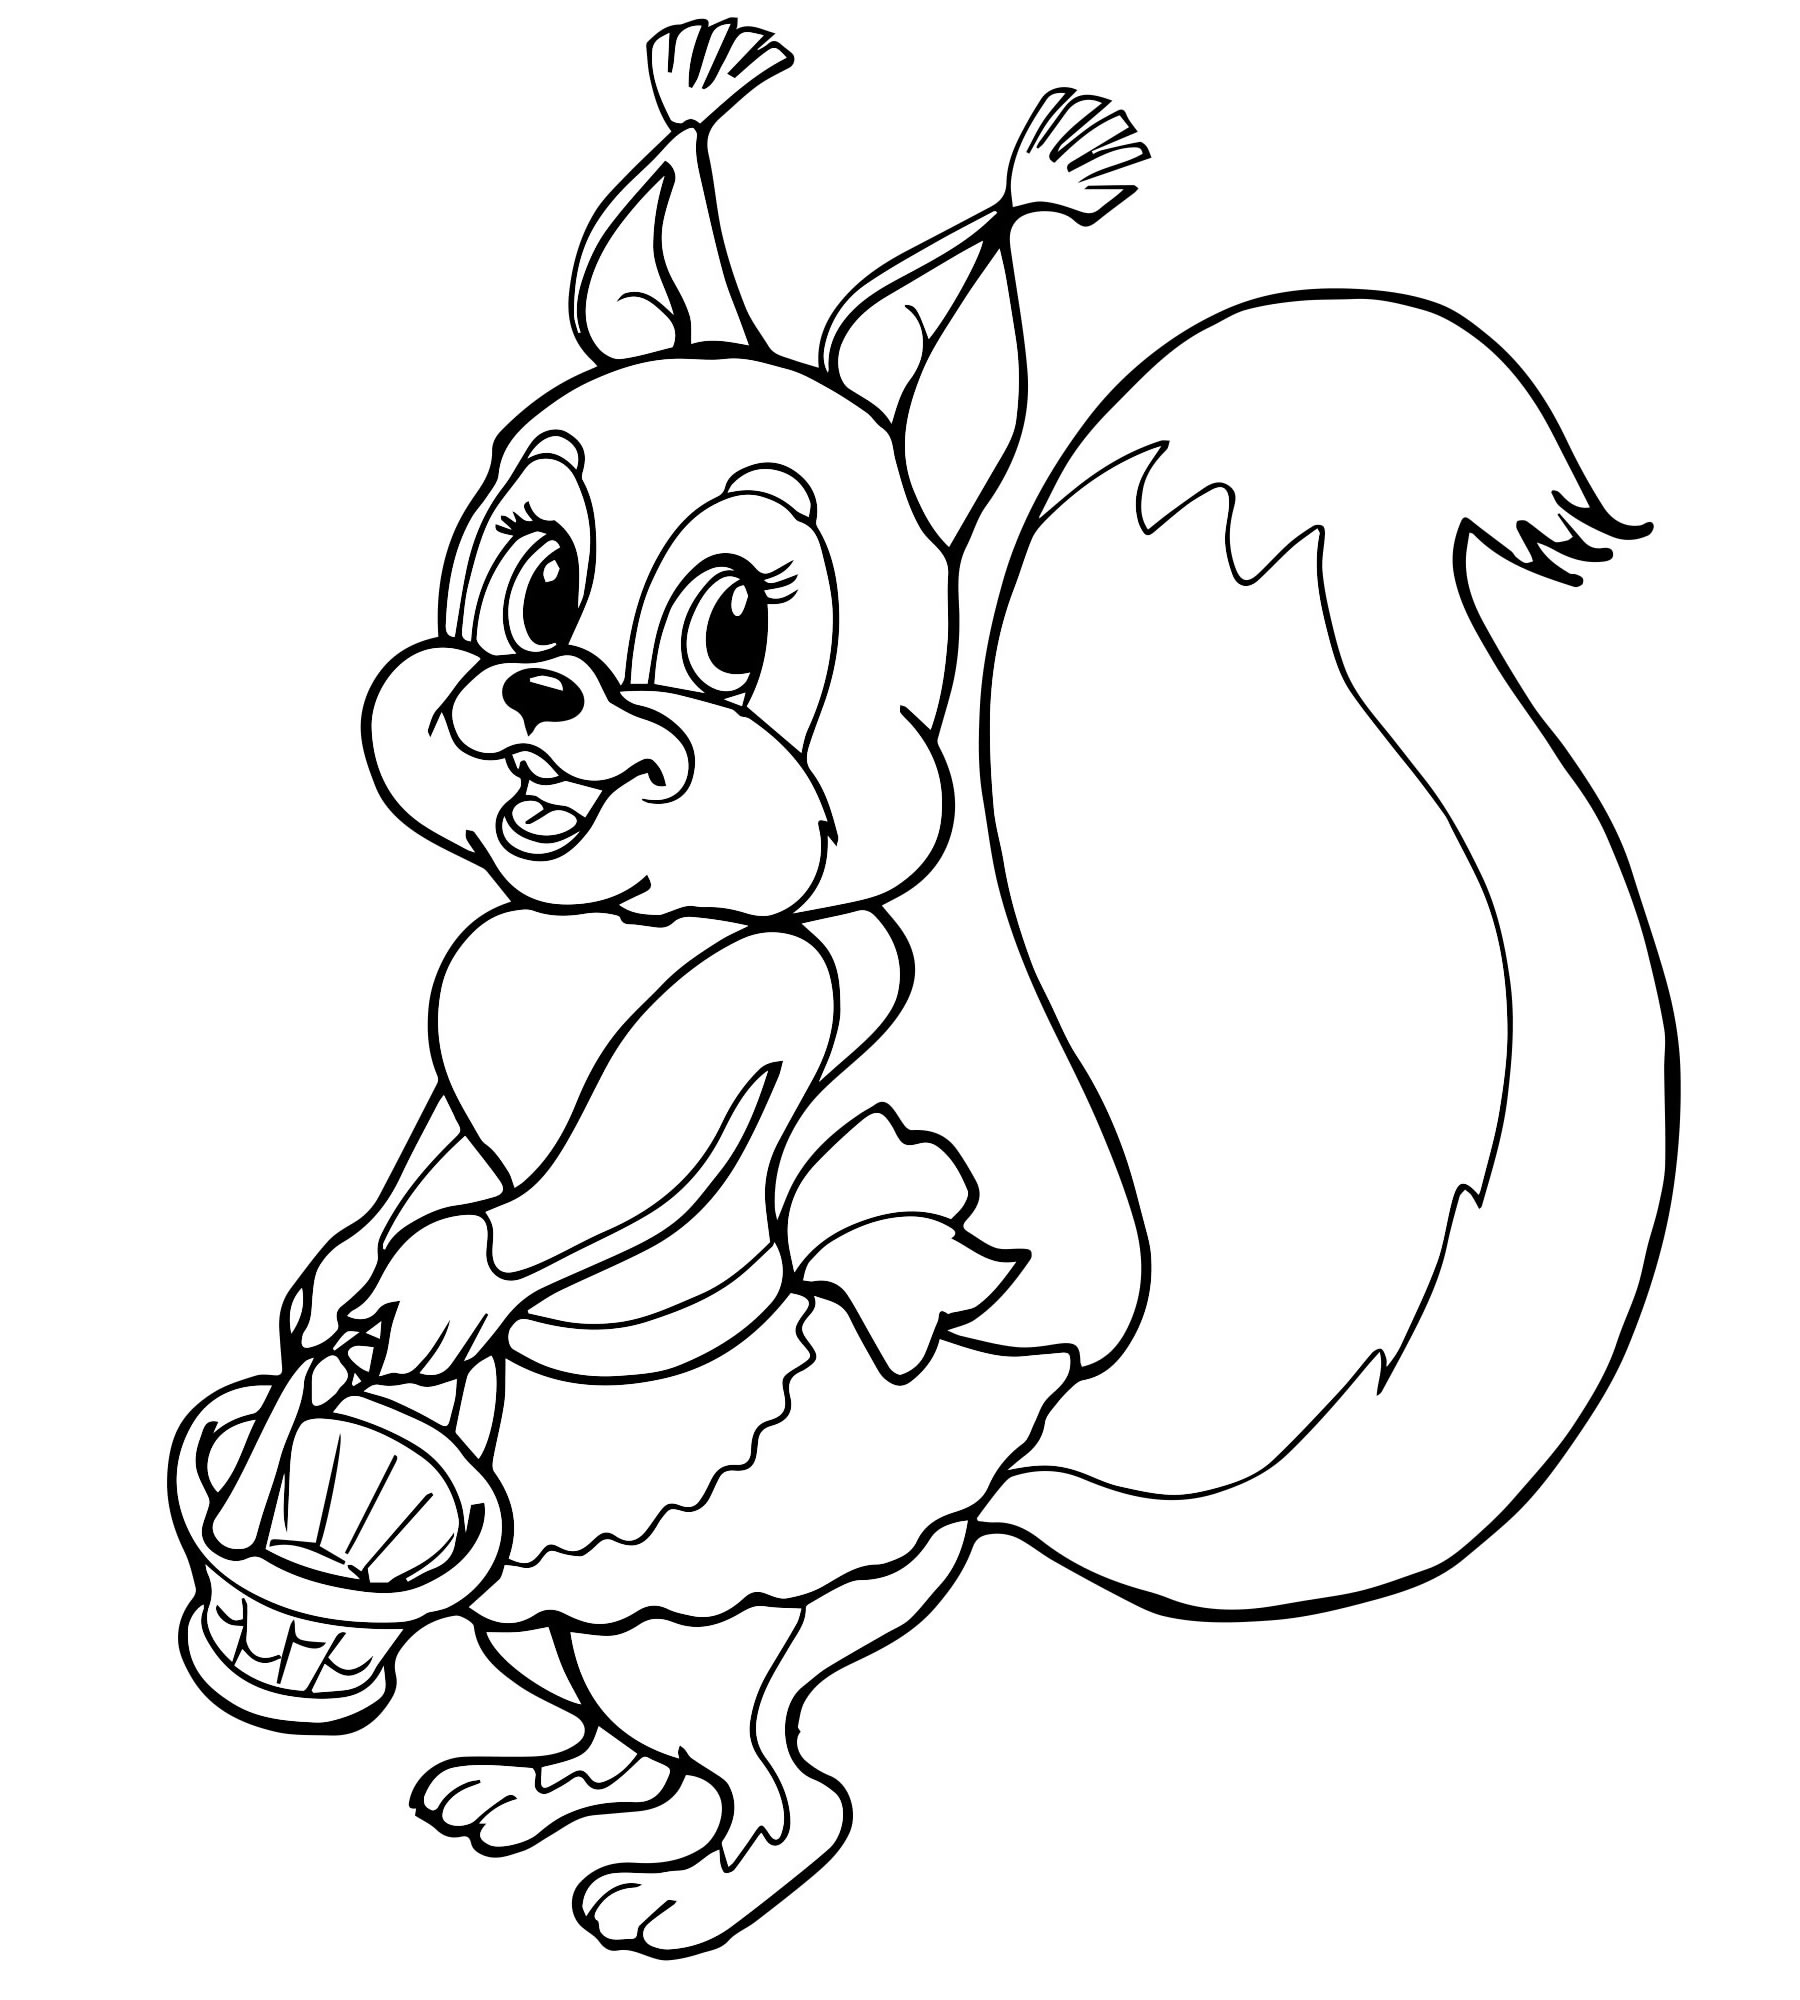 Adorable squirrel nuts coloring book for kids